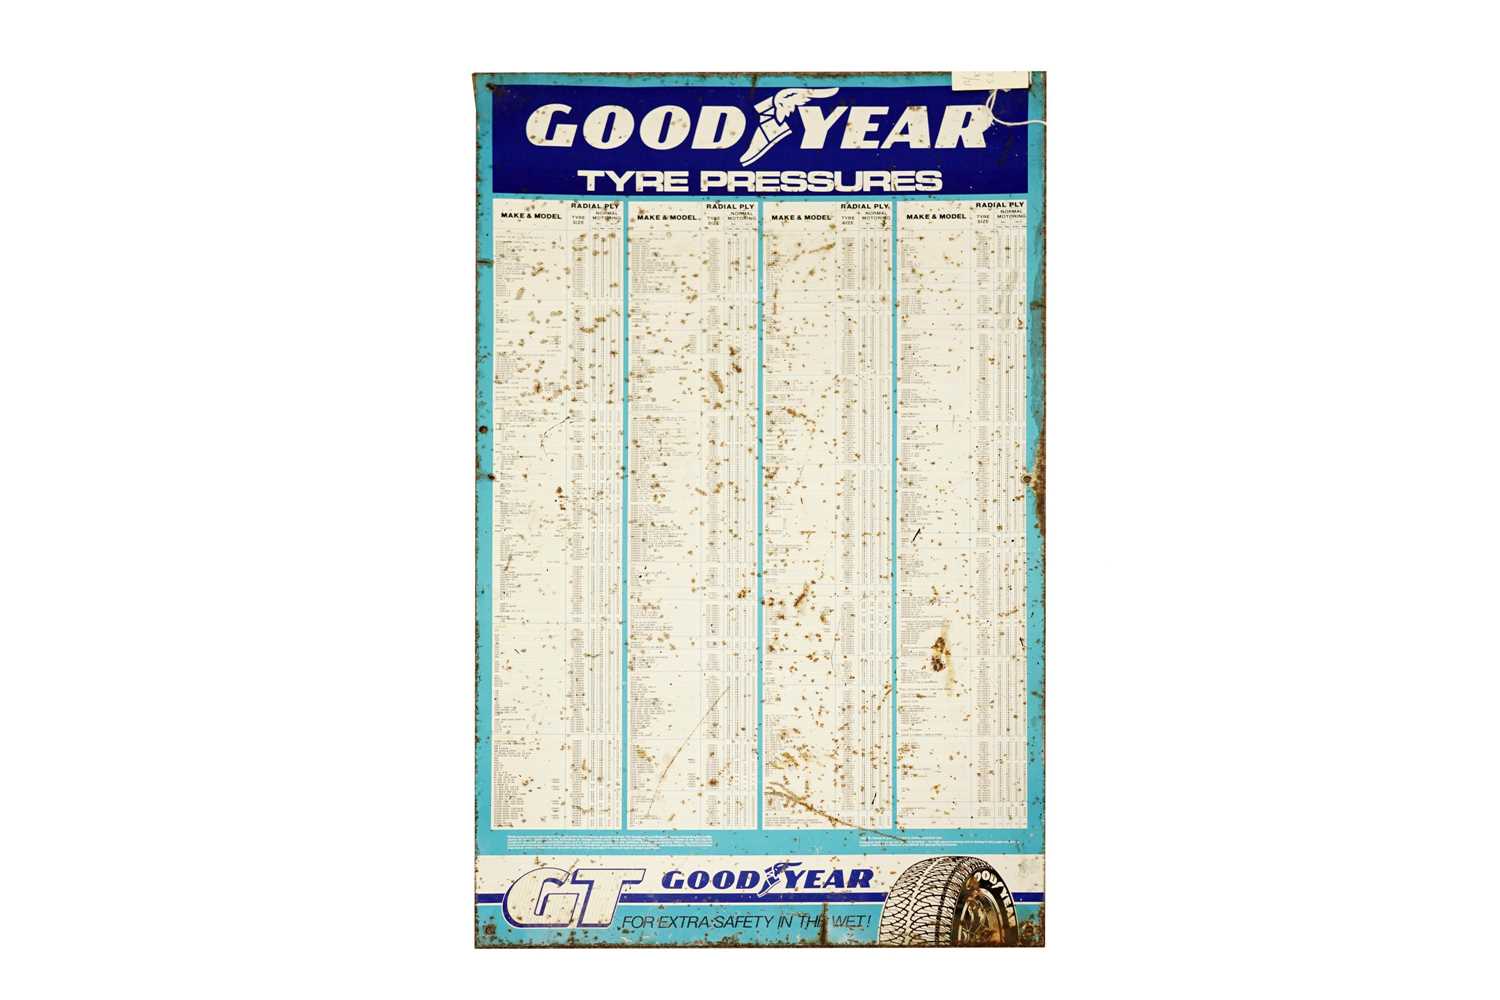 A Good Year tyre pressure chart enamel sign